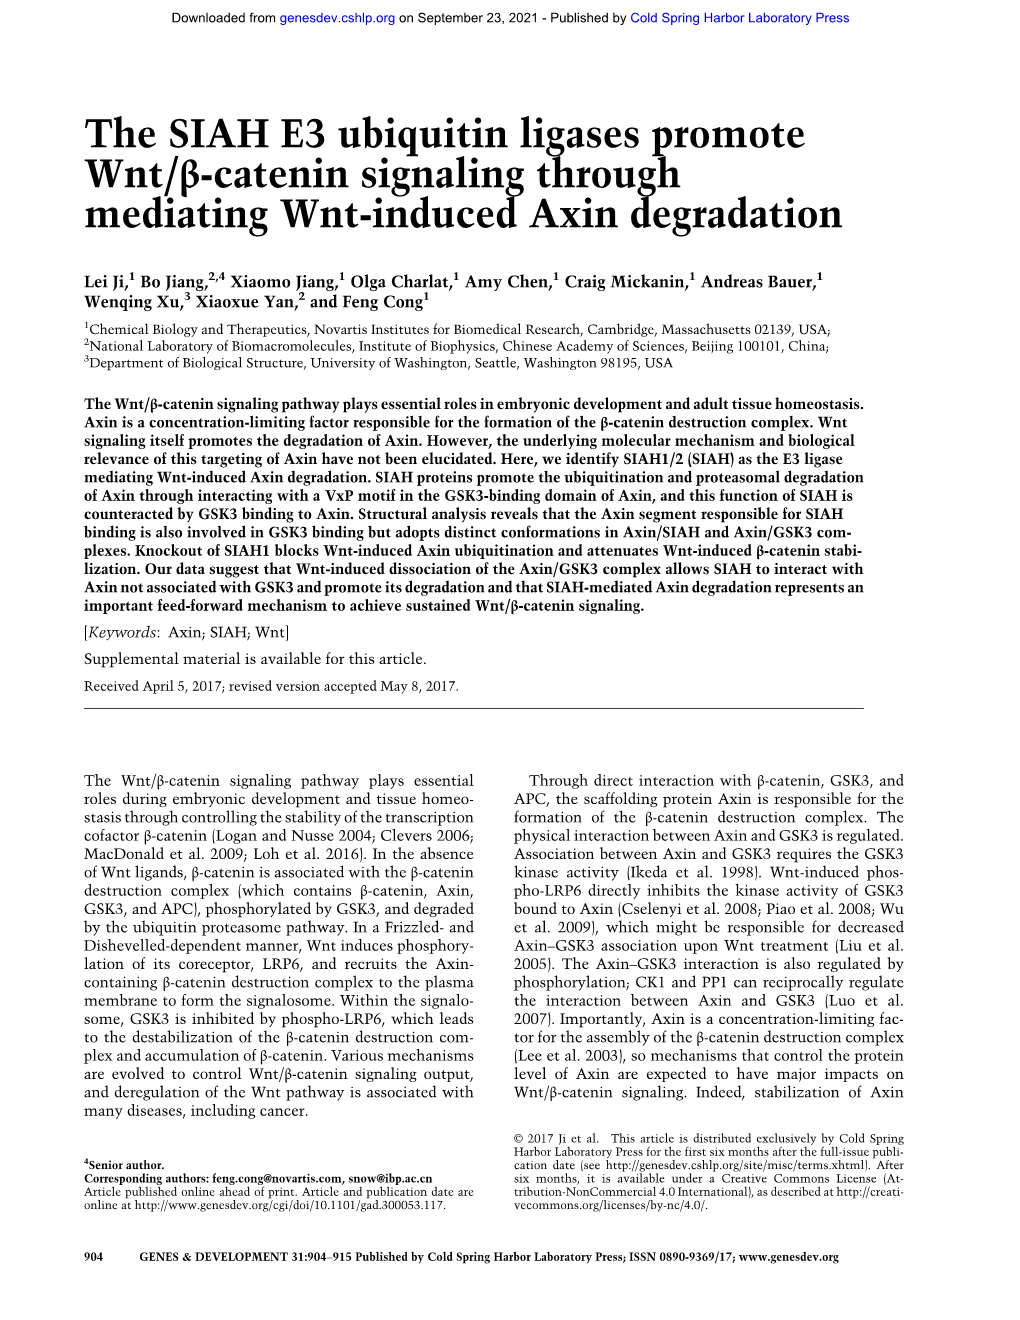 The SIAH E3 Ubiquitin Ligases Promote Wnt/Β-Catenin Signaling Through Mediating Wnt-Induced Axin Degradation